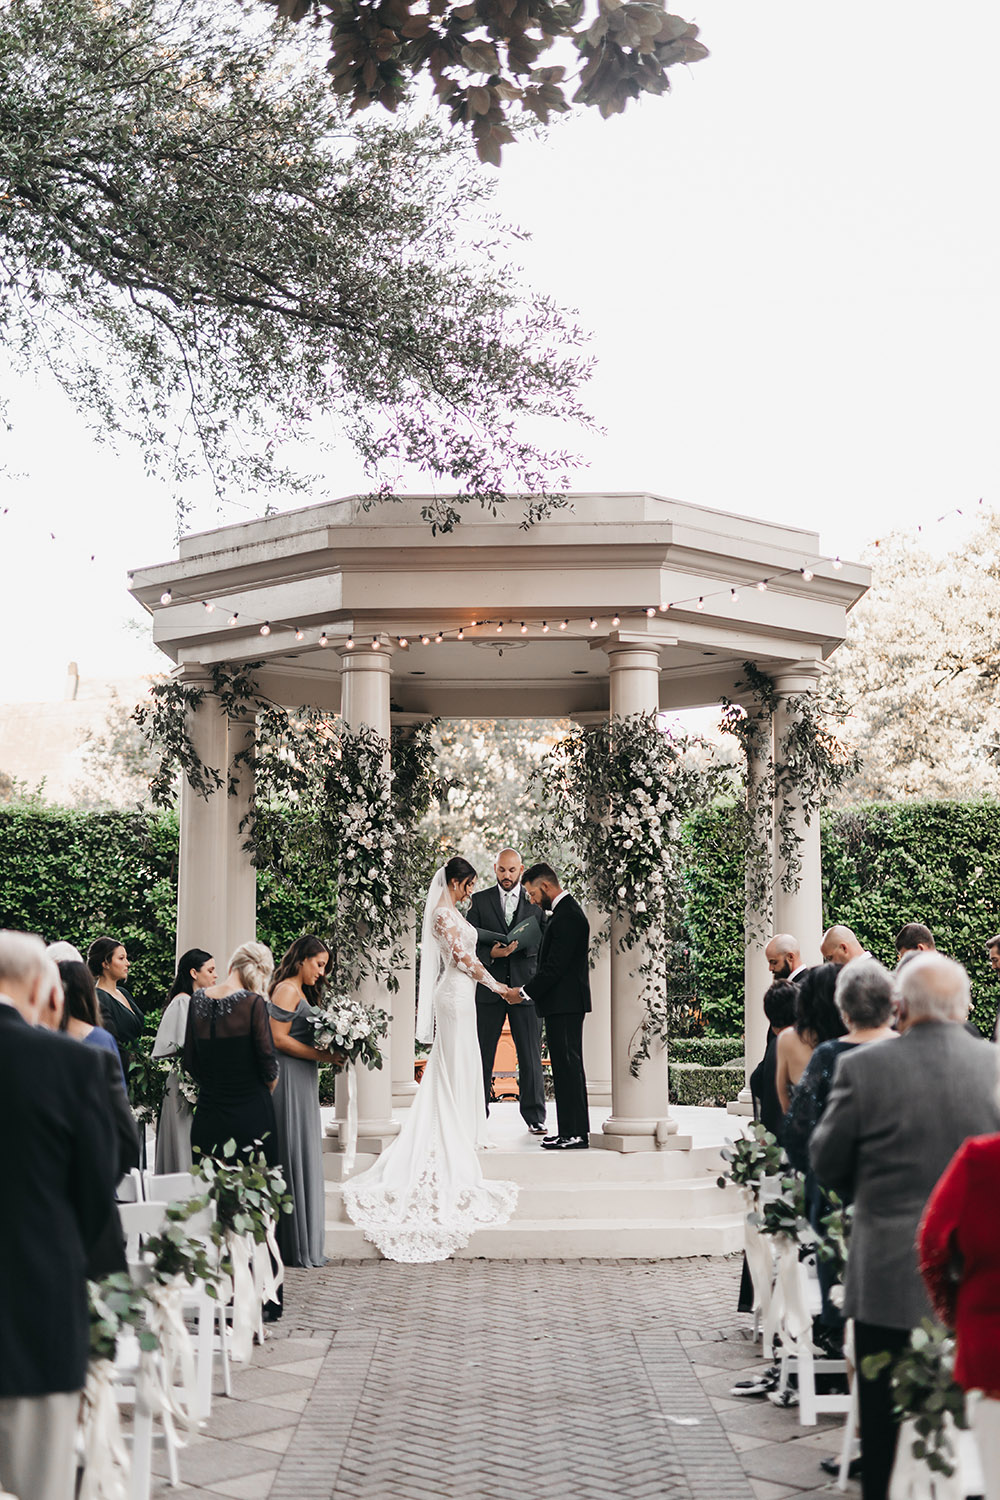 Kimberly and Carlo say their wedding vows in the gazebo at The Elms Mansion